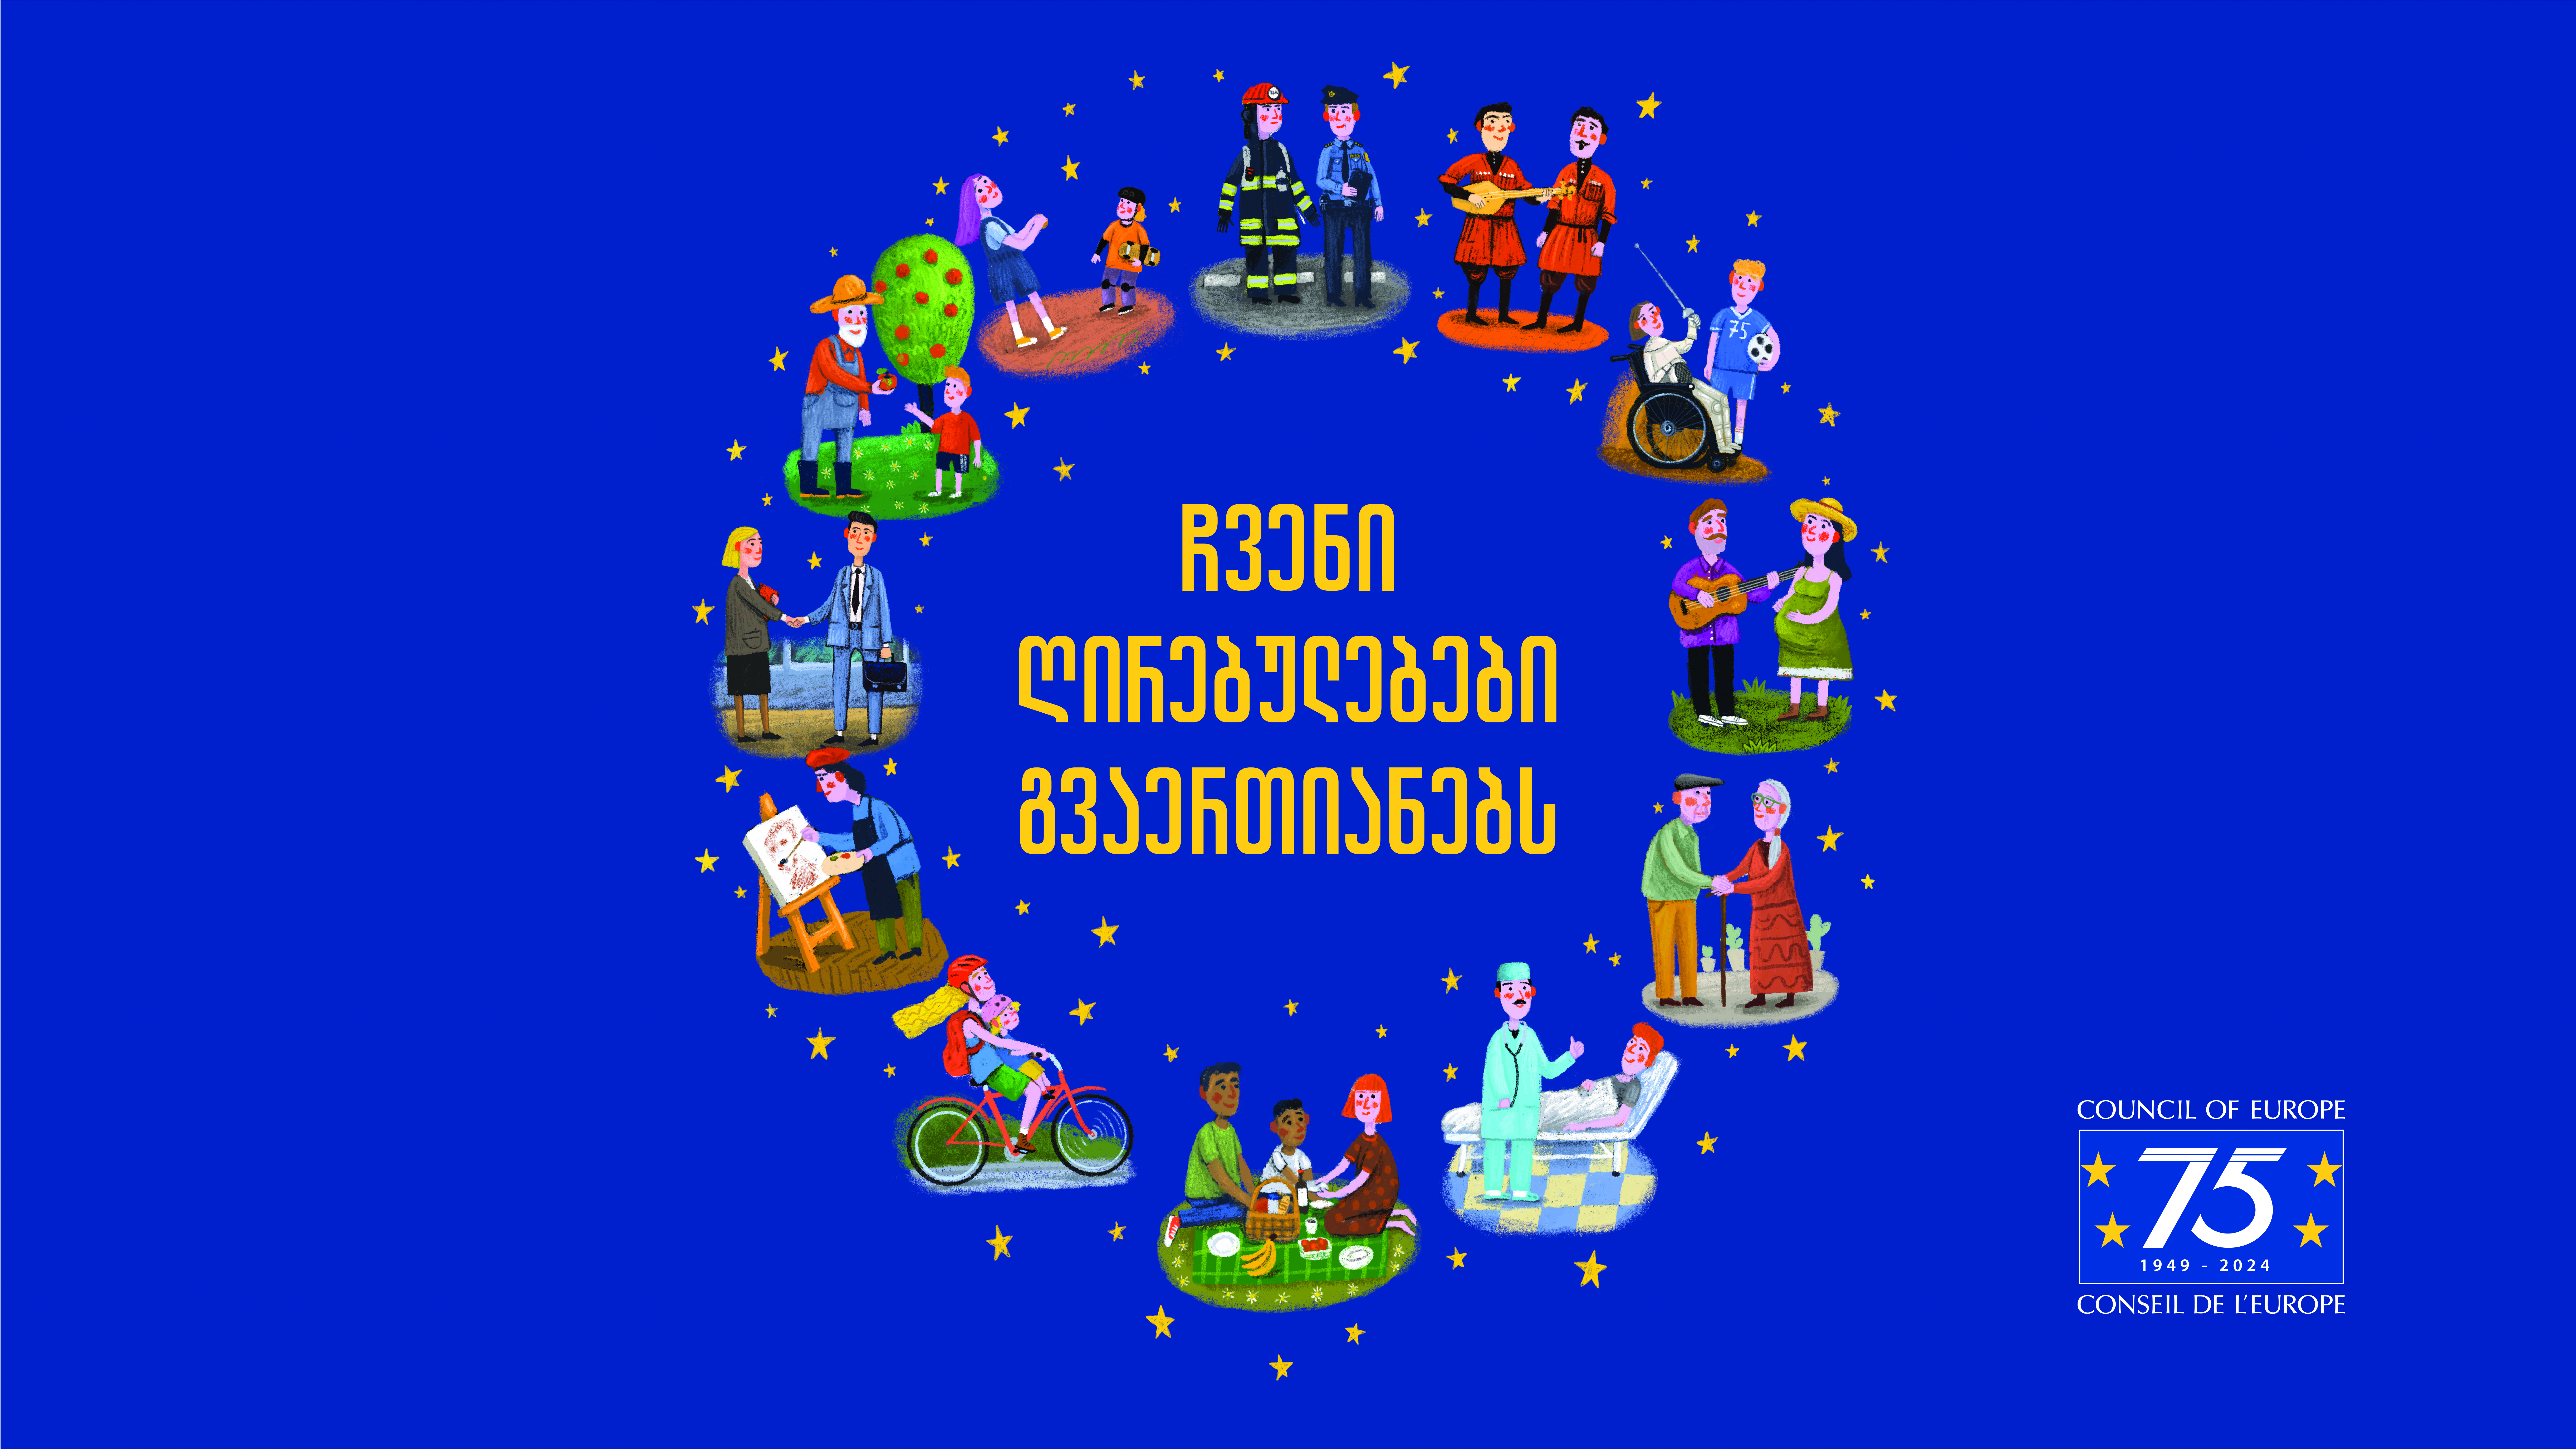 Celebrating 75th anniversary of the Council of Europe at Tbilisi Open Air festival